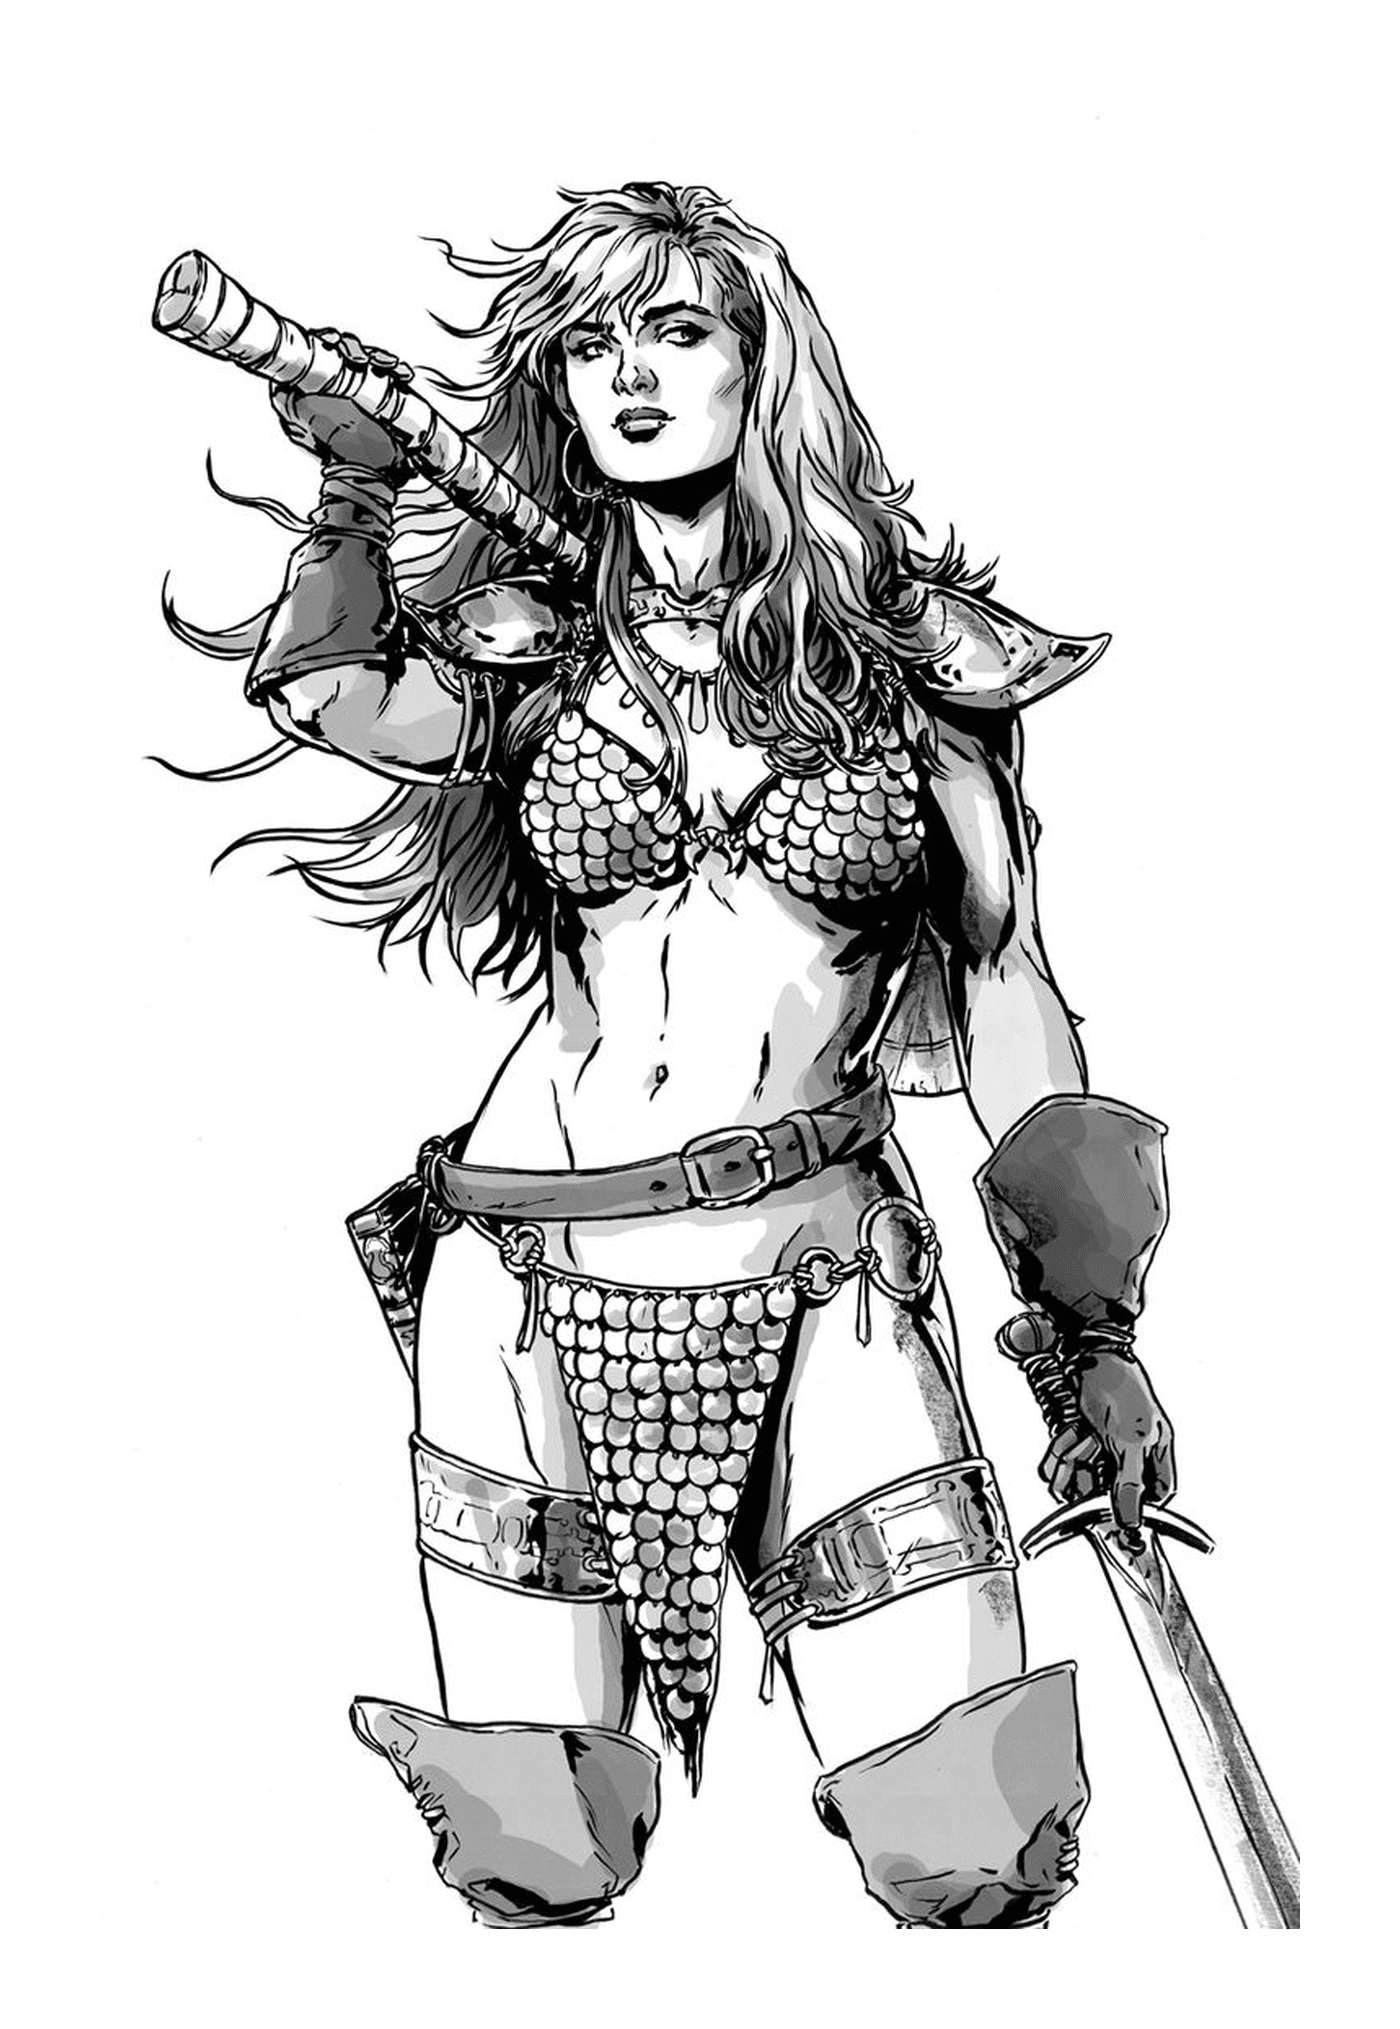  Red Sonja, friend of Xena by Mark Lambing 